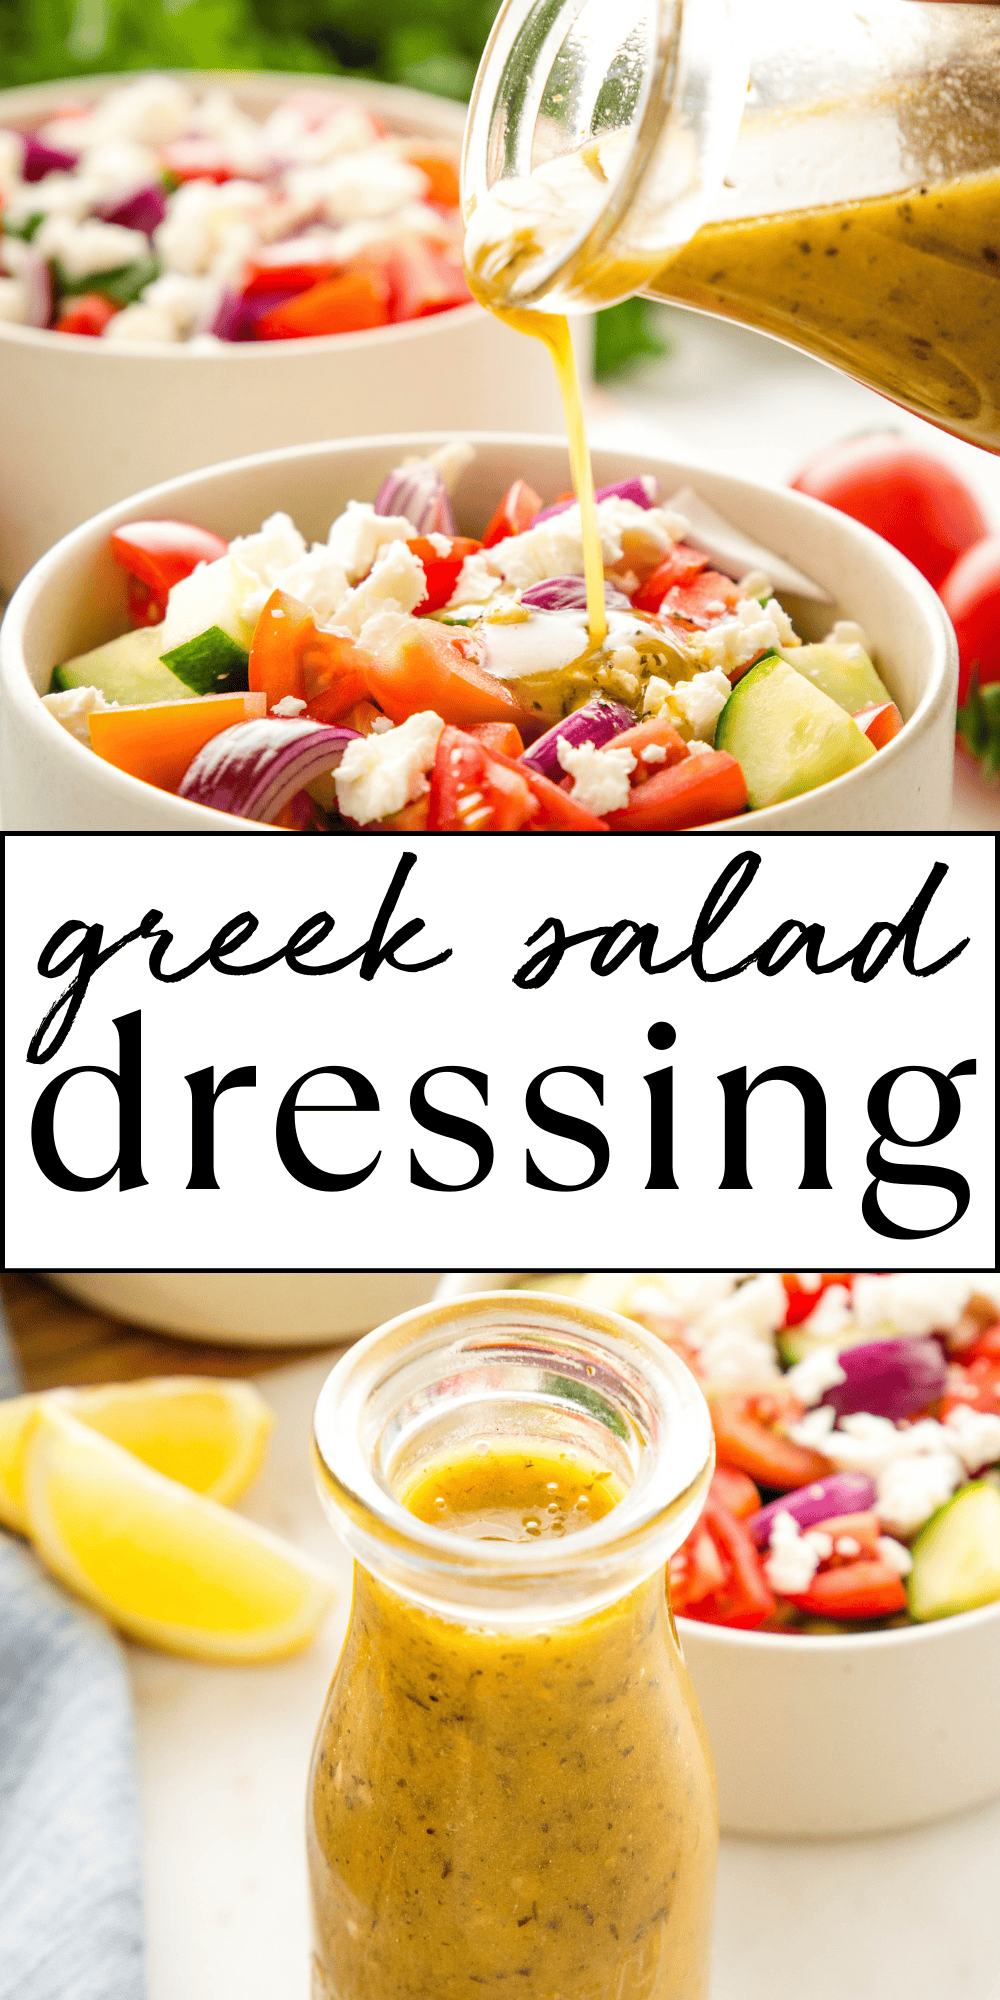 This Greek Salad Dressing recipe is the BEST easy Greek dressing. Made with basic ingredients, this Greek-style vinaigrette is easy to make in minutes and it's perfect on salads, for serving on grilled veggies, and even used as a marinade for grilled meats. Recipe from thebusybaker.ca! #greeksaladdressing #greekdressing #greeksalad #greekrecipe #saladdressing #dressing #saladdressingrecipe via @busybakerblog